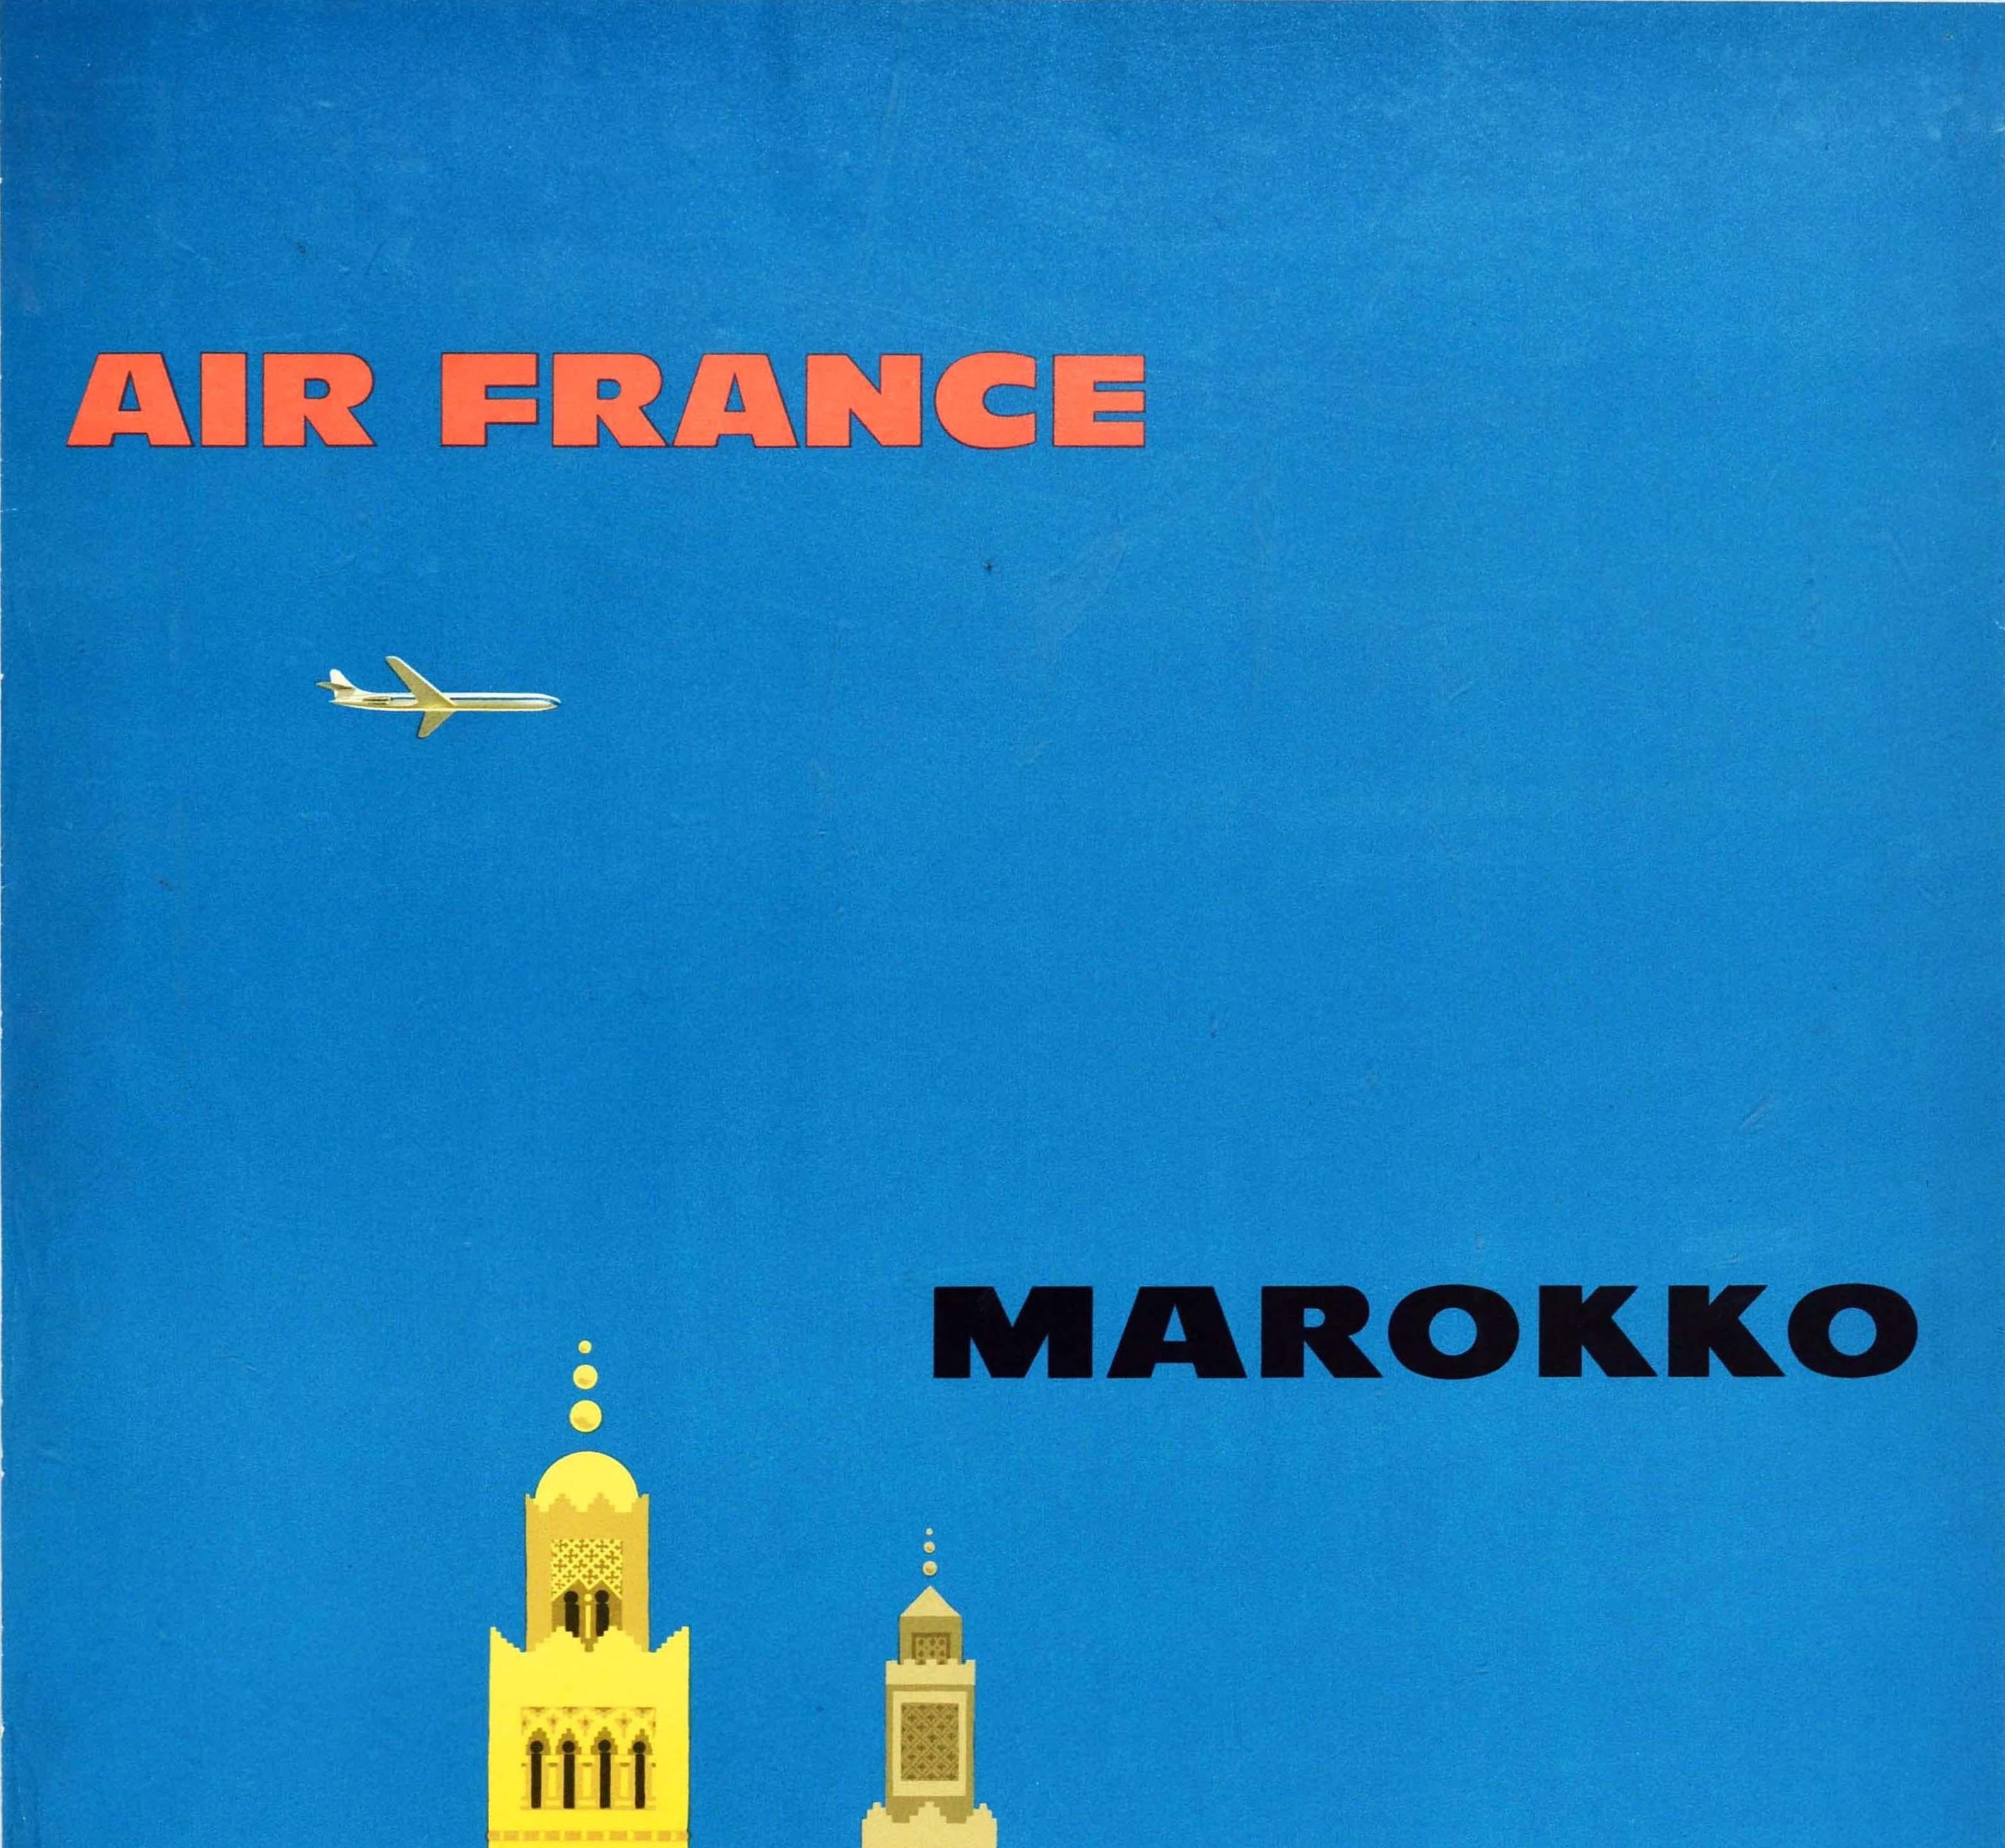 Original Vintage Airline Travel Poster Air France Marokko Morocco North Africa - Print by Jean Fortin